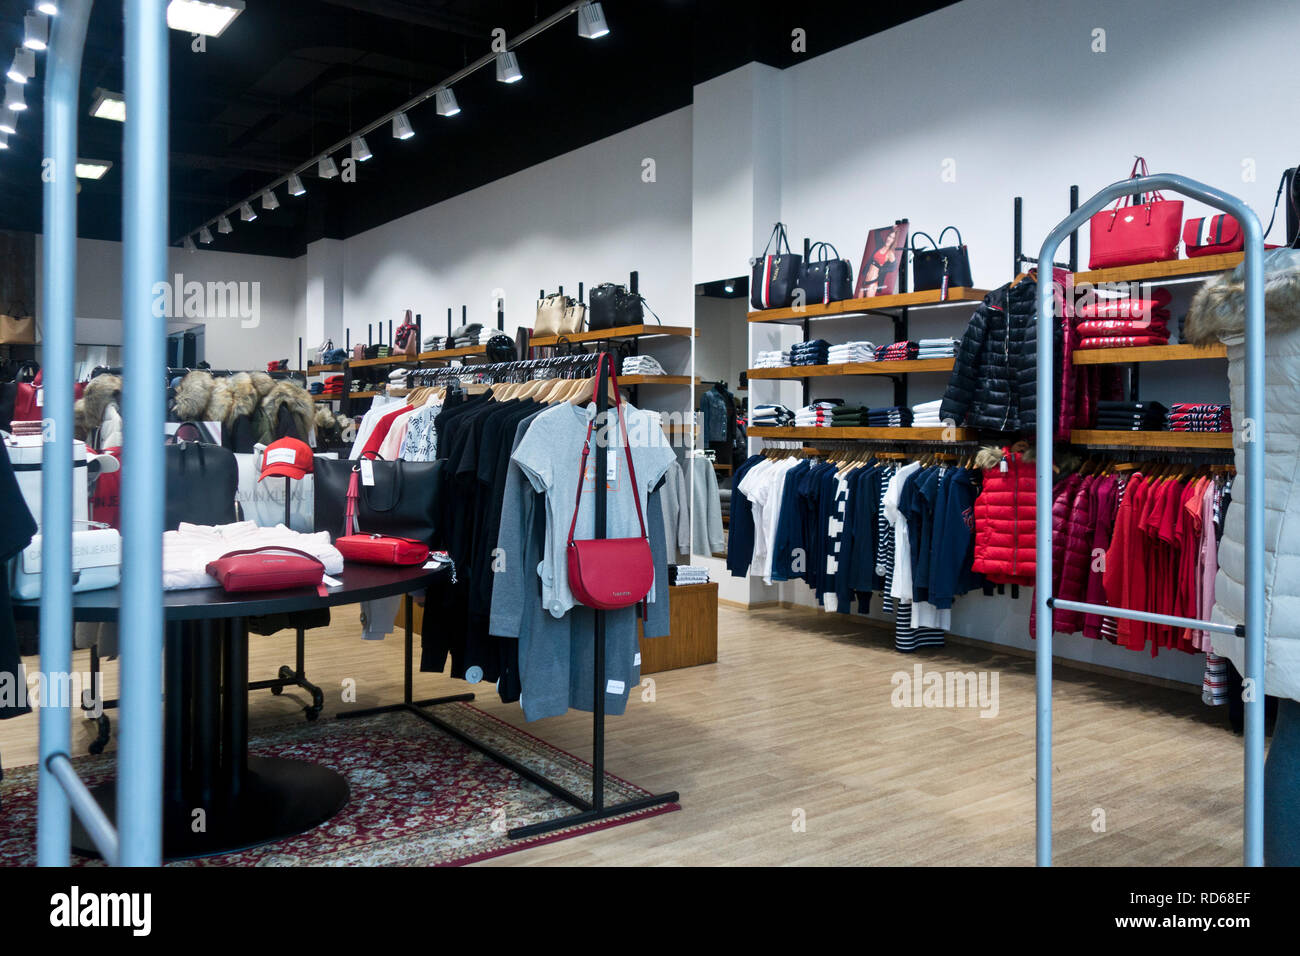 Page 3 - Clothes Shop Interior High Resolution Stock Photography and Images  - Alamy